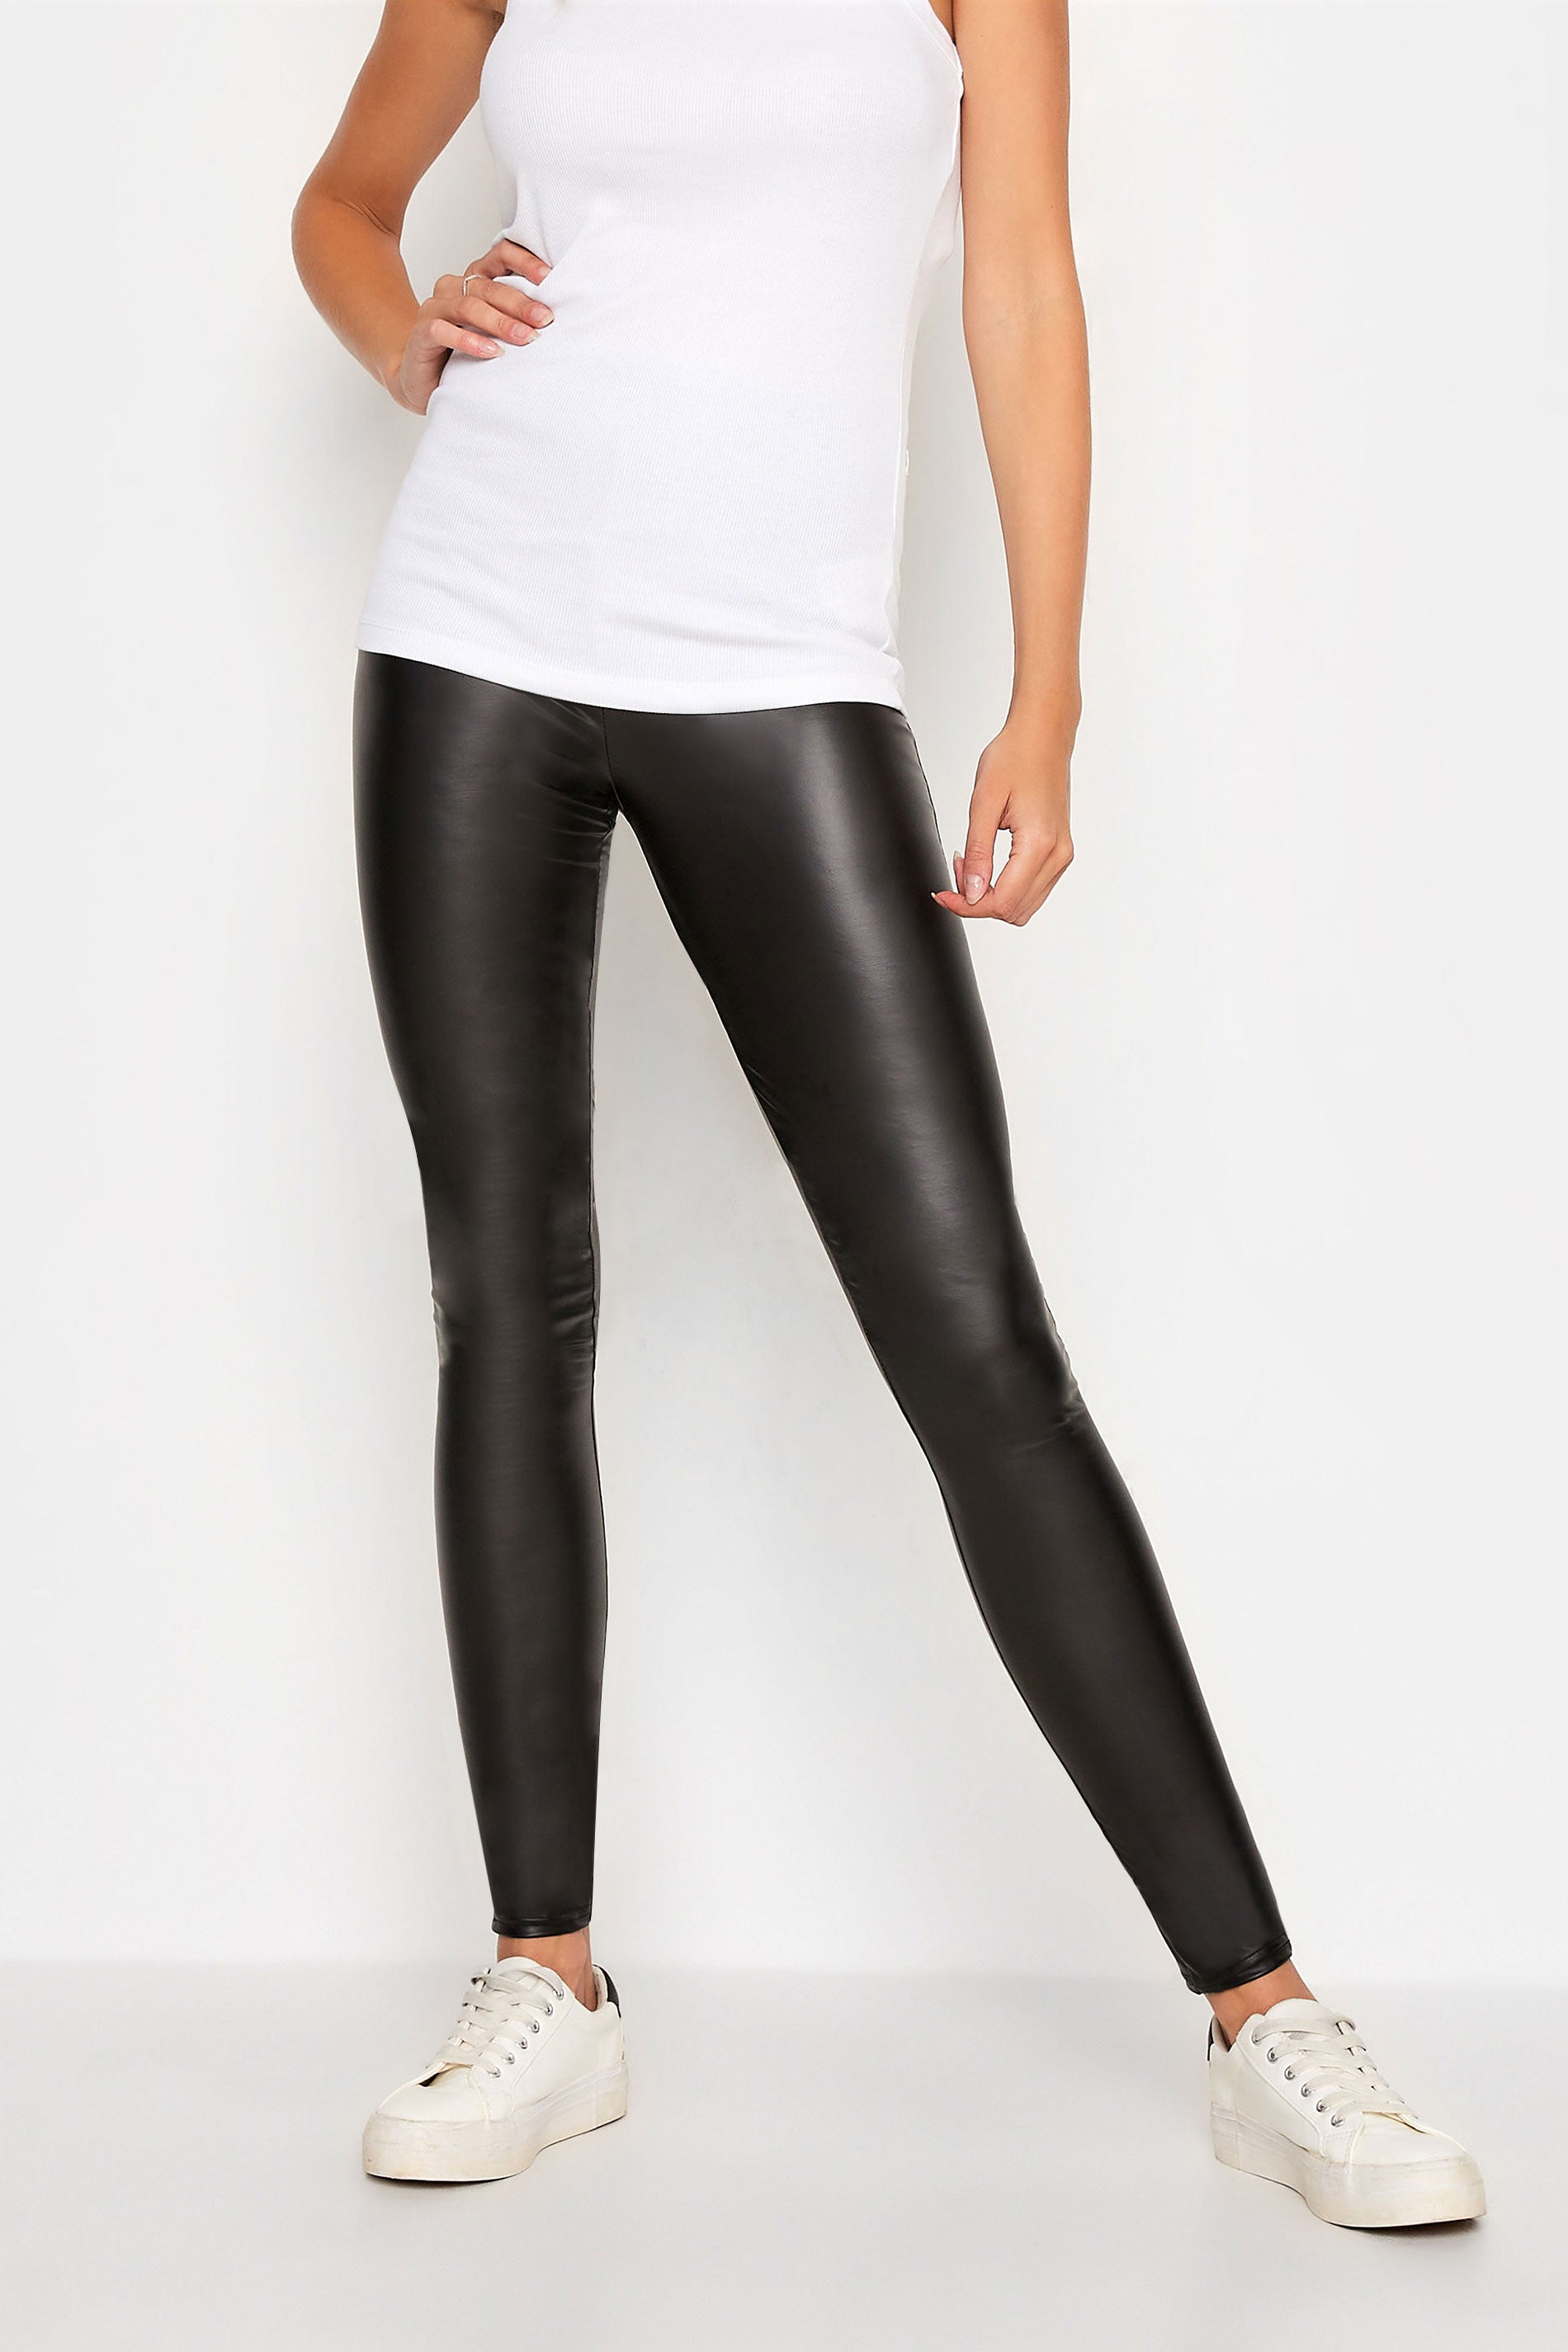 Tall Black Stretch Leather Look Leggings – Search By Inseam